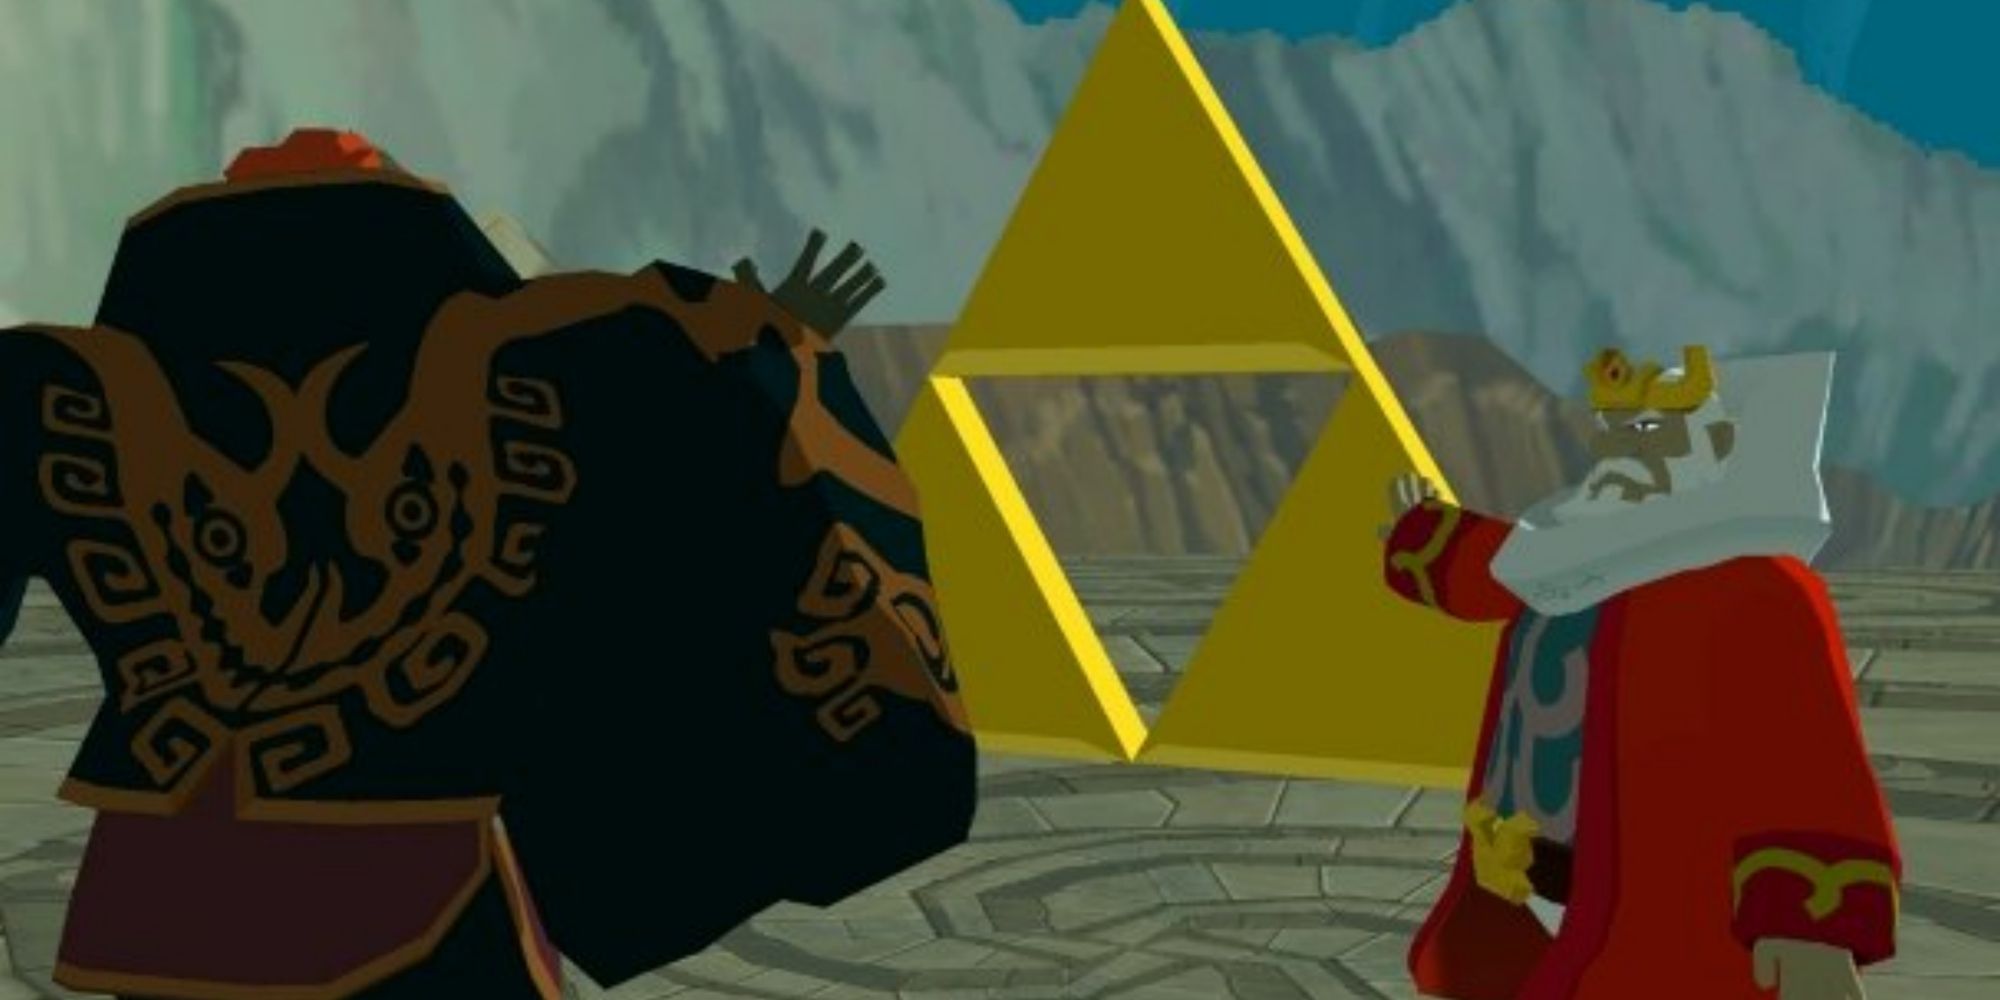 The King of Hyrule opposite Ganondorf with the Triforce in the background in The Wind Waker.